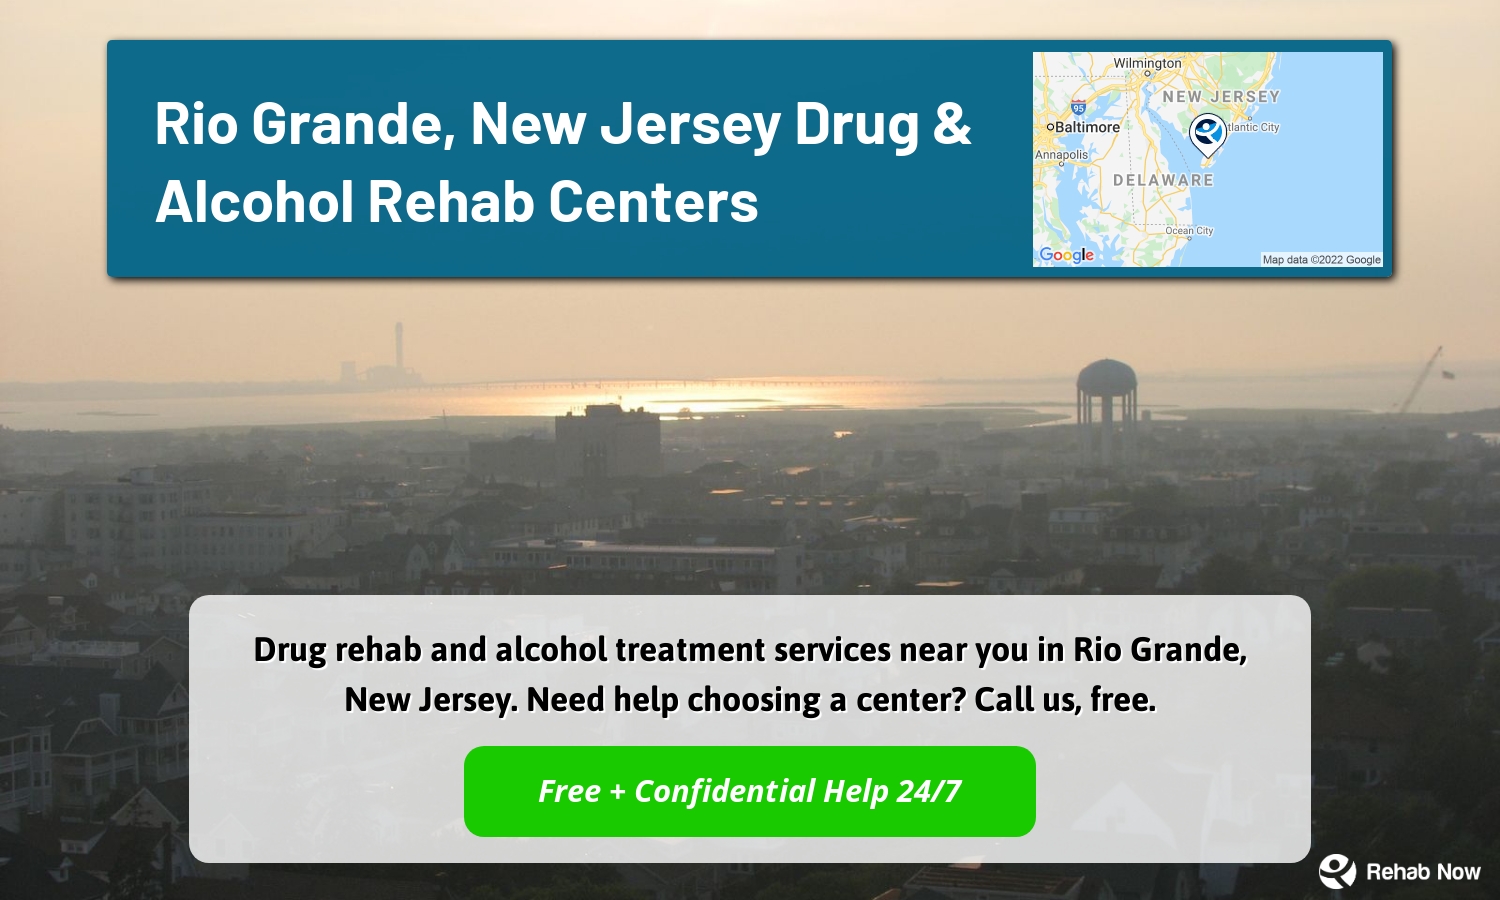 Drug rehab and alcohol treatment services near you in Rio Grande, New Jersey. Need help choosing a center? Call us, free.